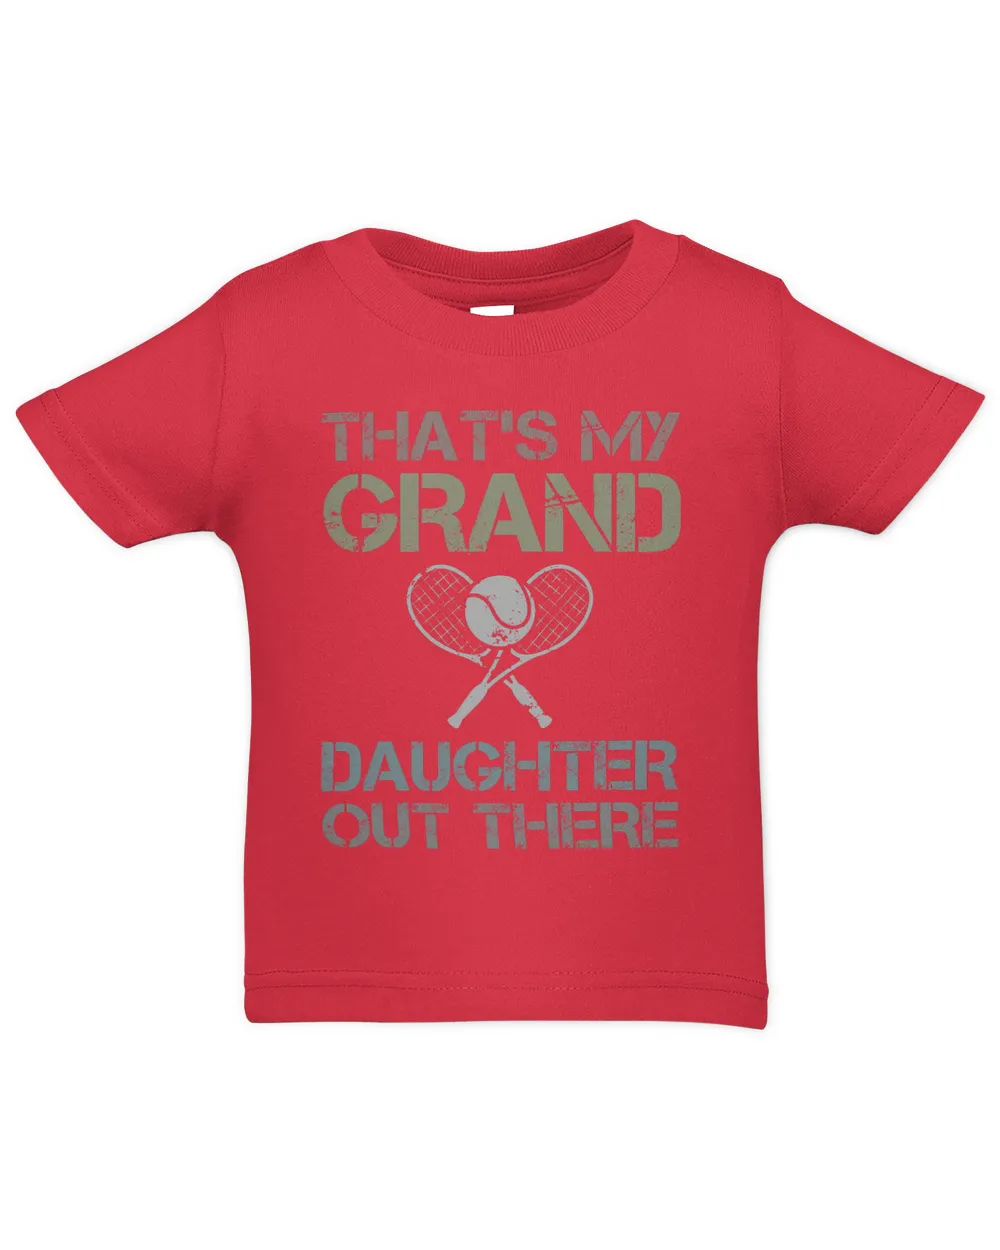 Thats My Granddaughter Out There Funny Grandpa Grandma Pun